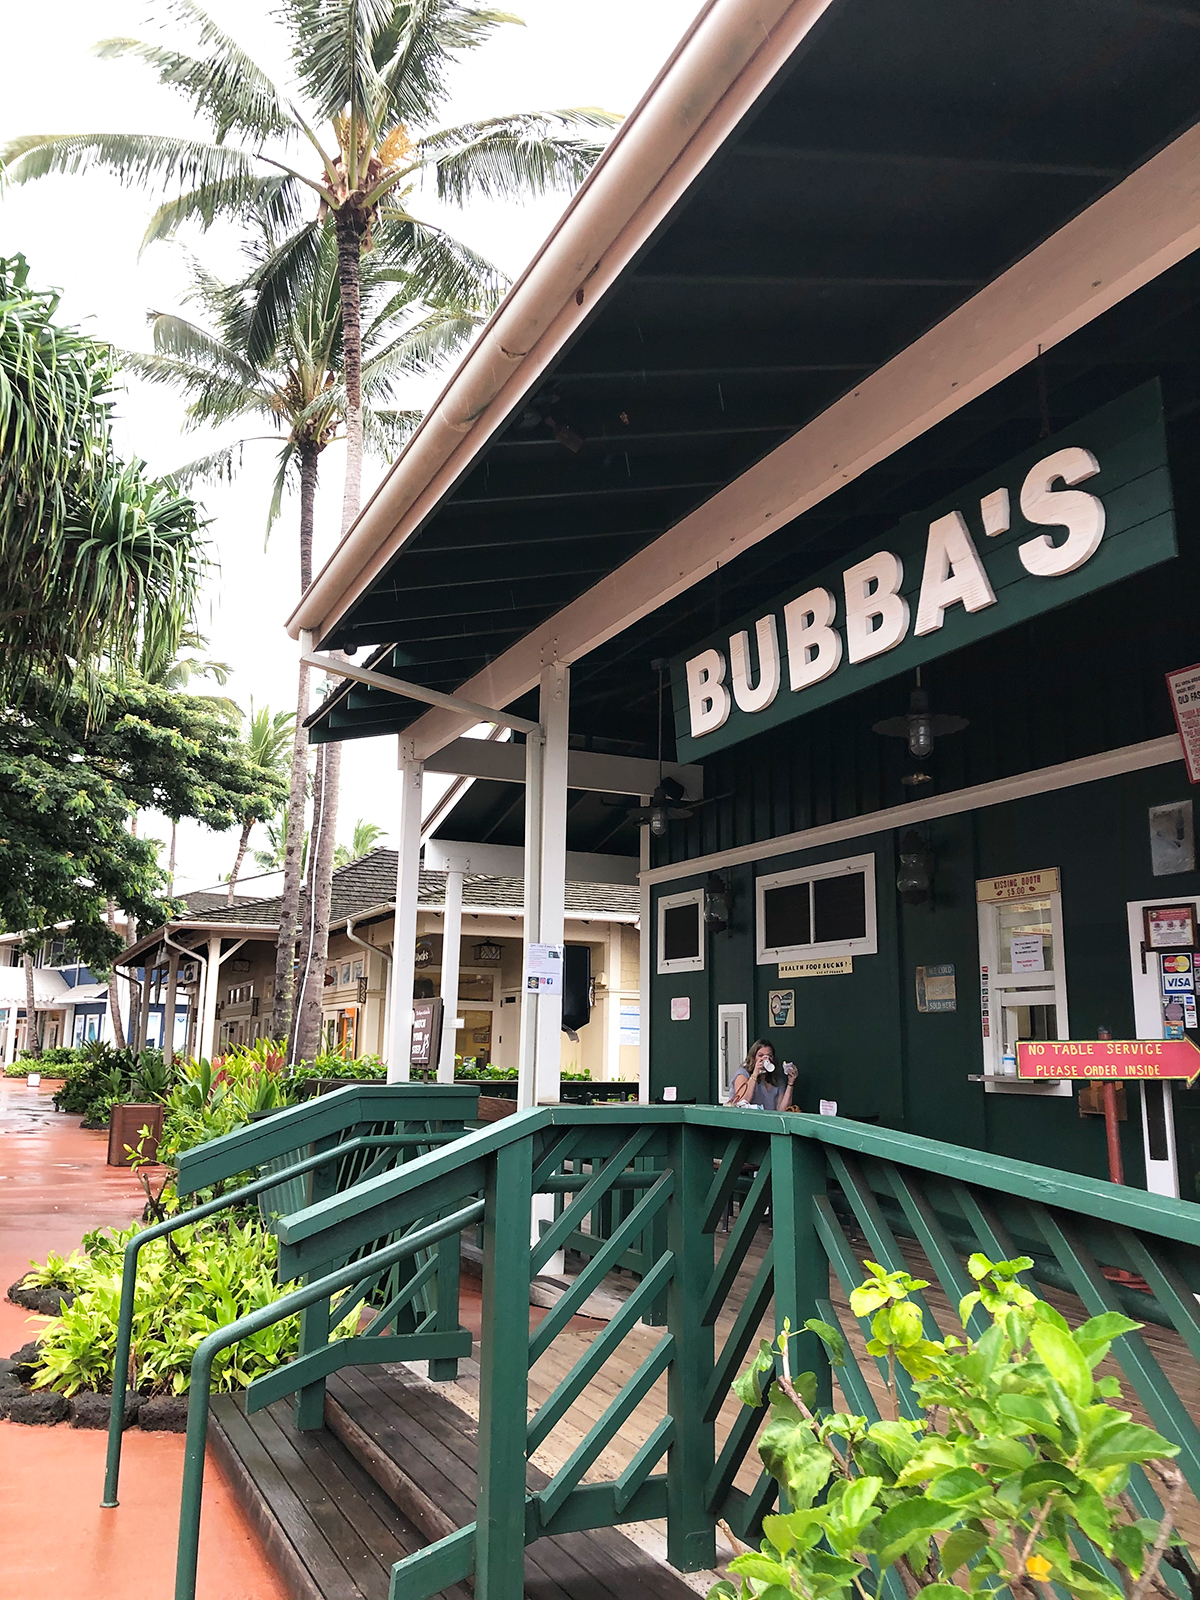 entrance to bubbas with green painted railing and buildings in background with palm trees